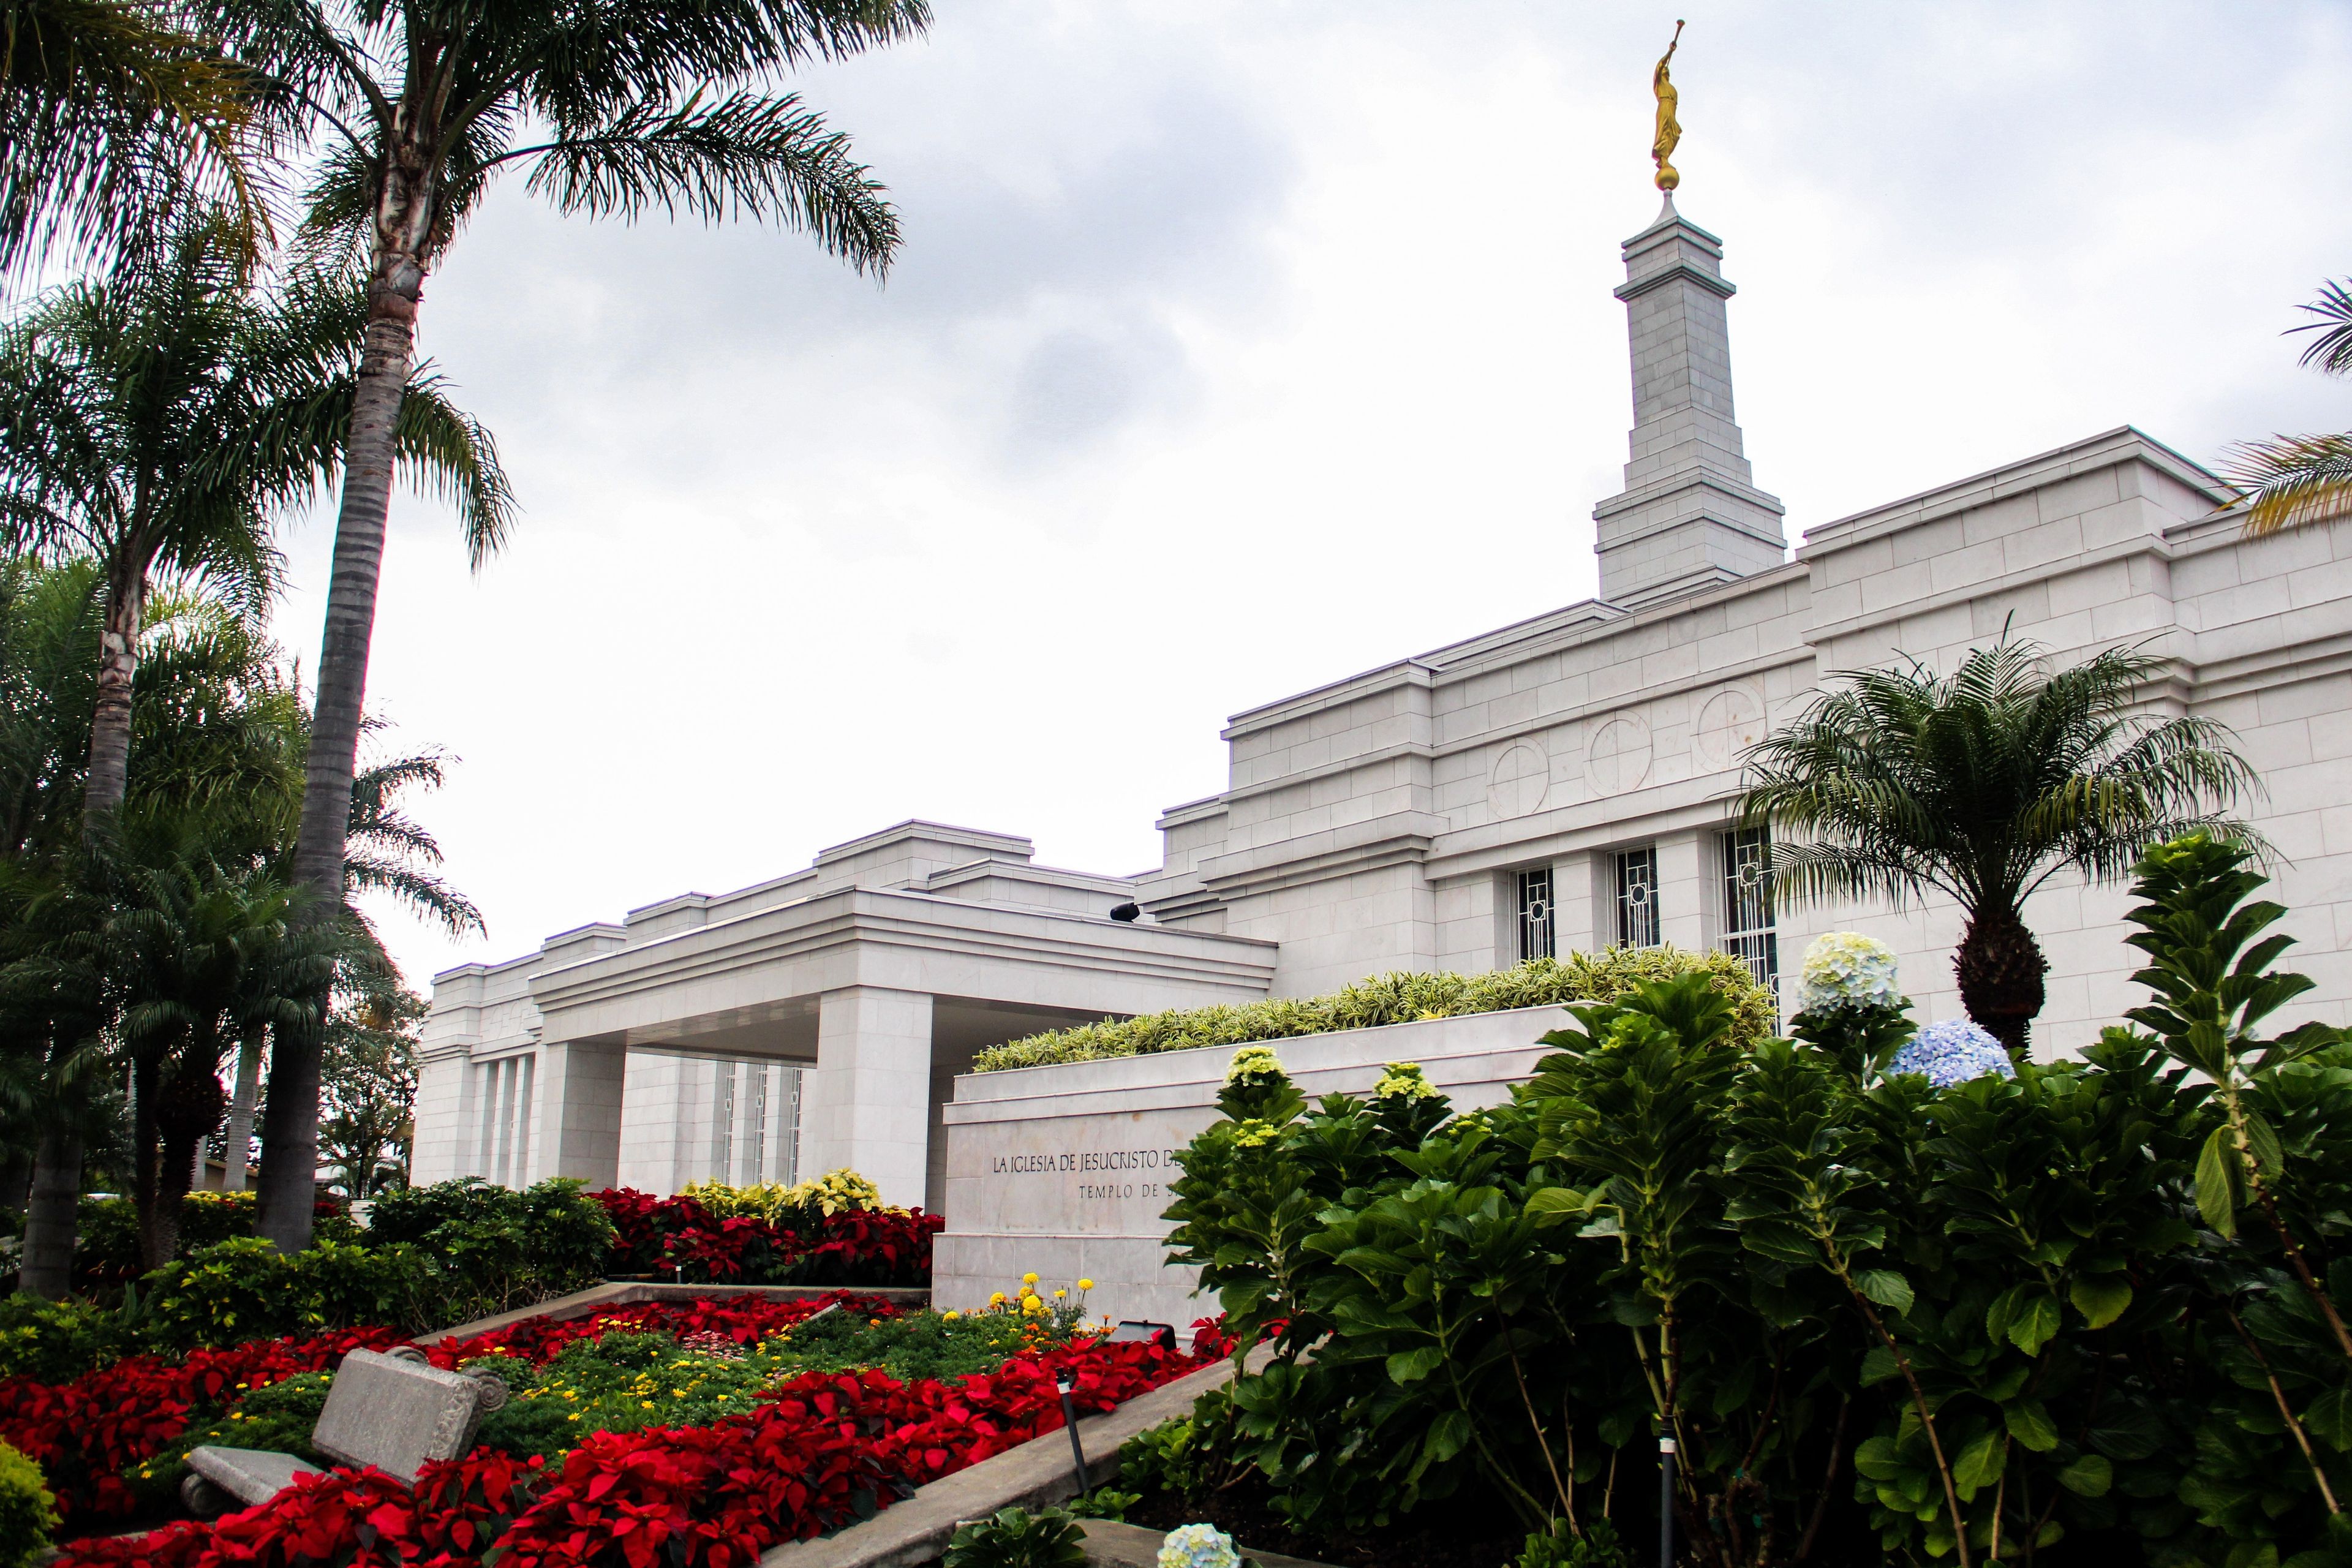 The San José Costa Rica Temple, including the name sign, entrance, and scenery.